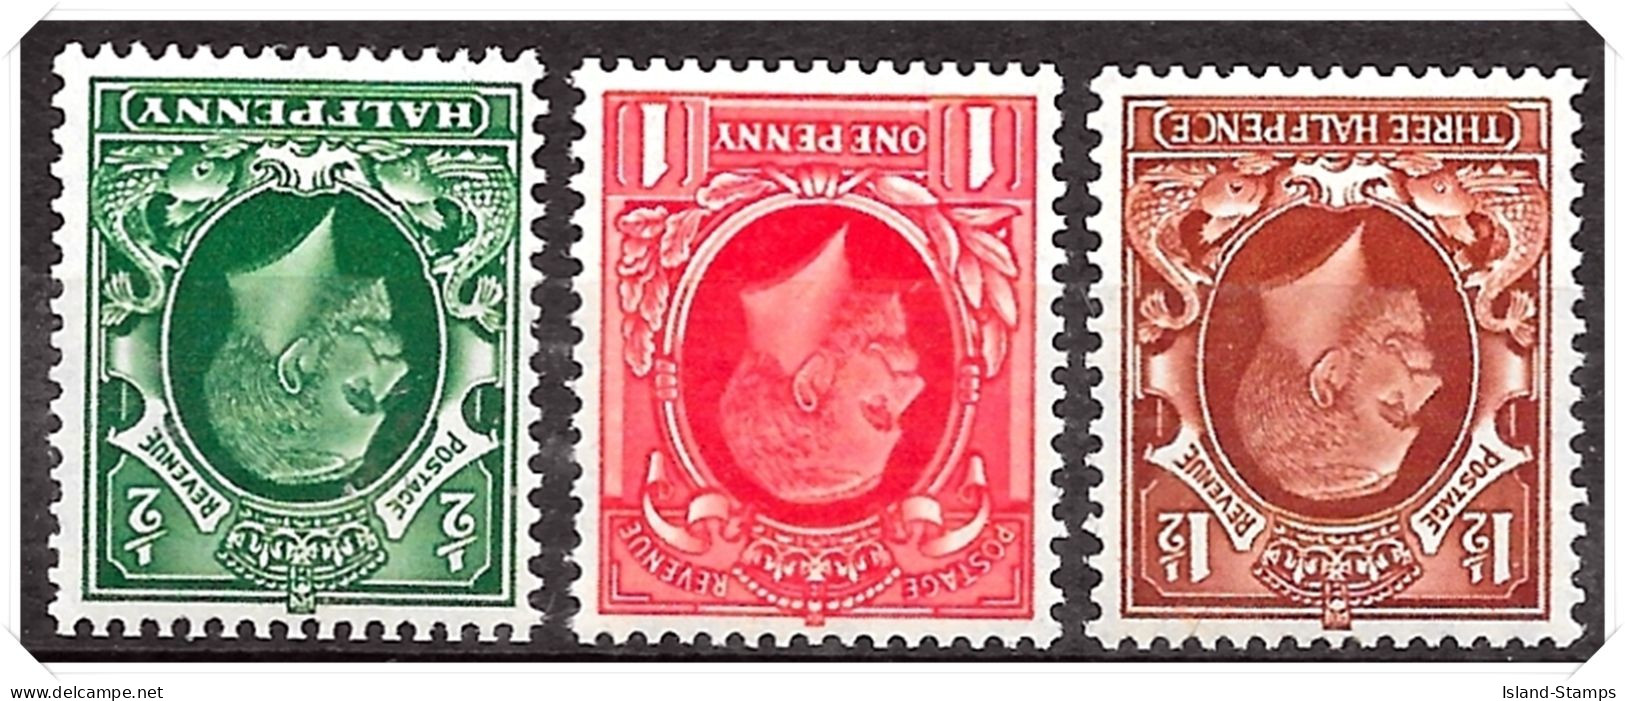 1934-36 KGV Photogravure Set Of 3 SG 439wi-41wi  Unmounted Mint HRD4-B-4 - Unused Stamps